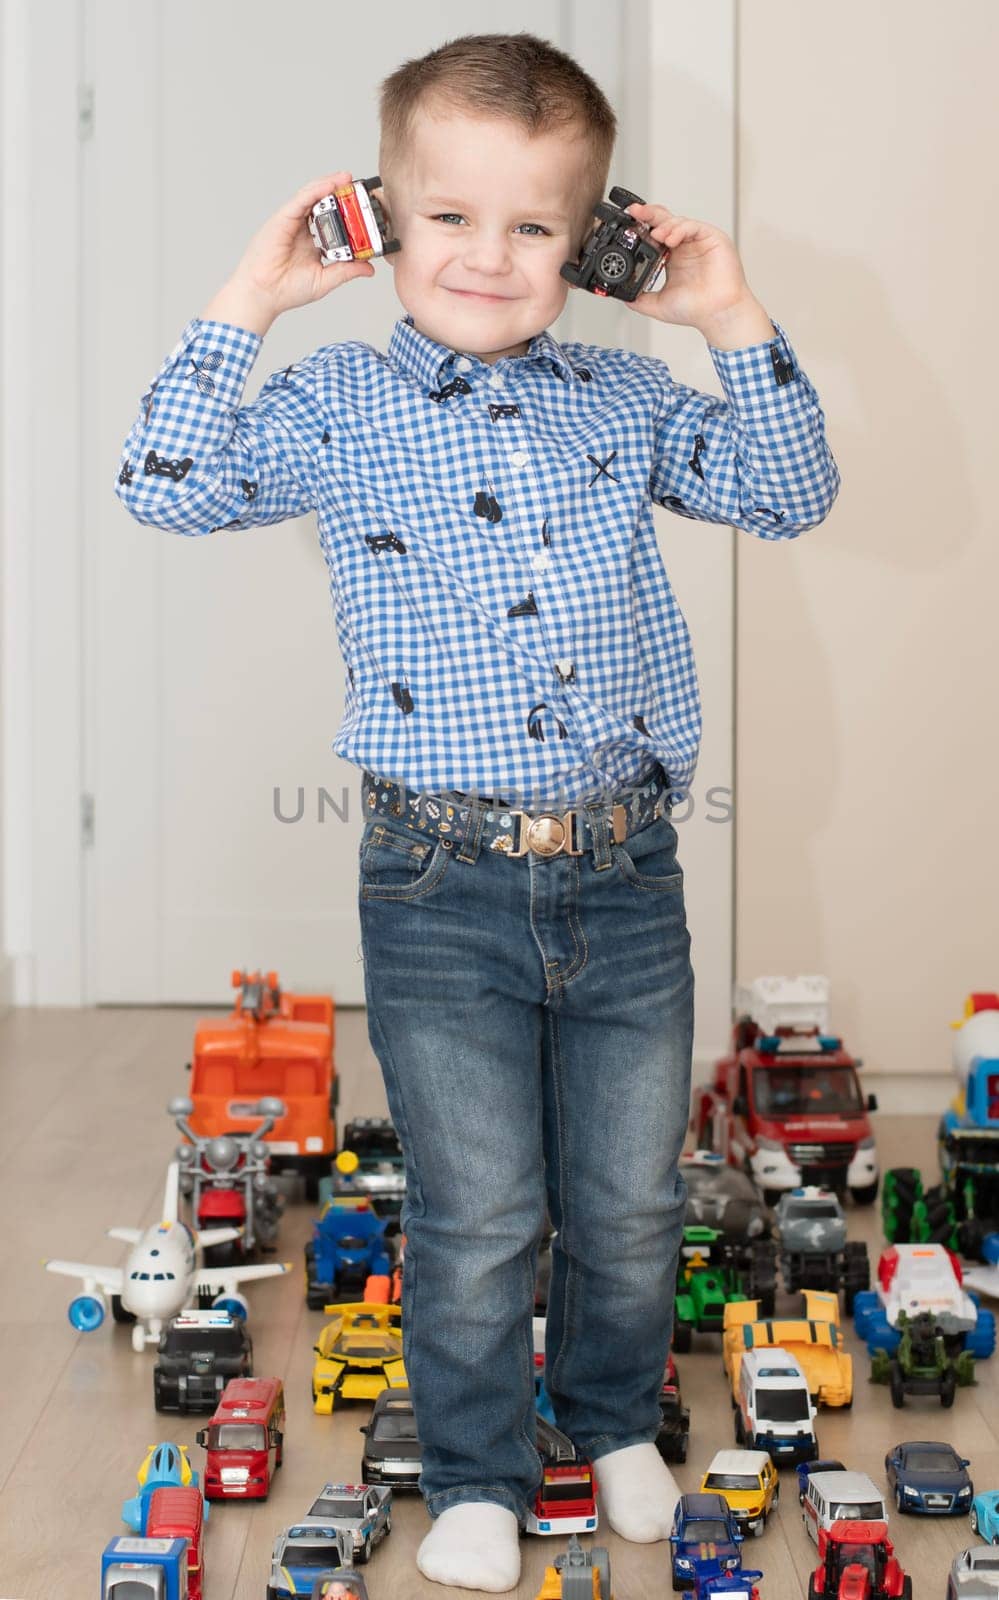 Children. Toy cars. A small cheerful and handsome boy, 4 years old, wearing a checkered shirt, plays with many colorful cars in a home interior. The toys are placed evenly on the floor.